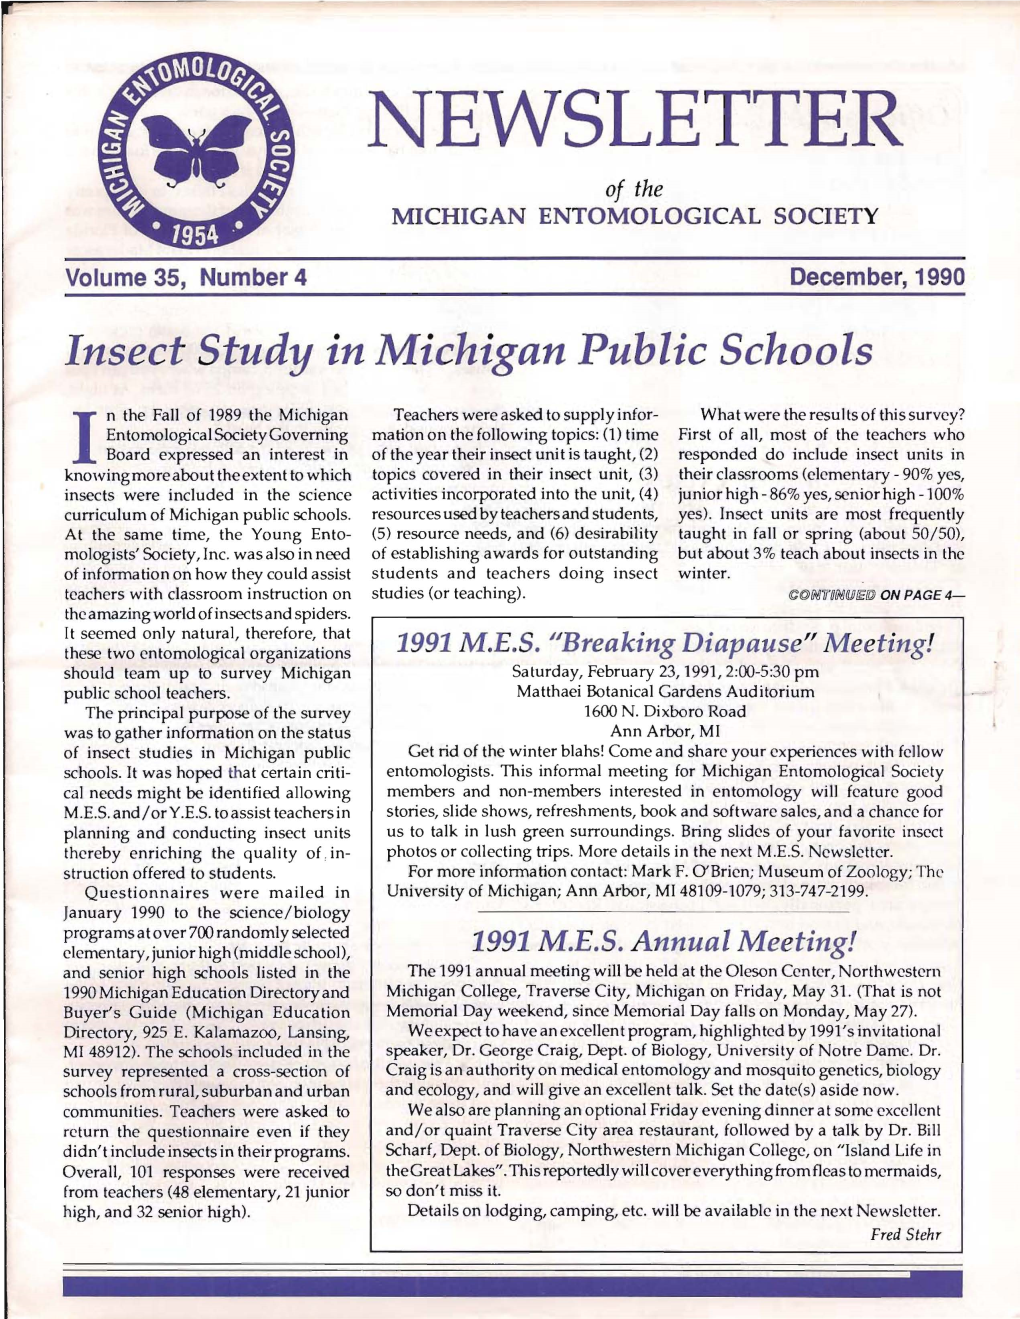 NEWSLETTER of the MICHIGAN ENTOMOLOGICAL SOCIETY